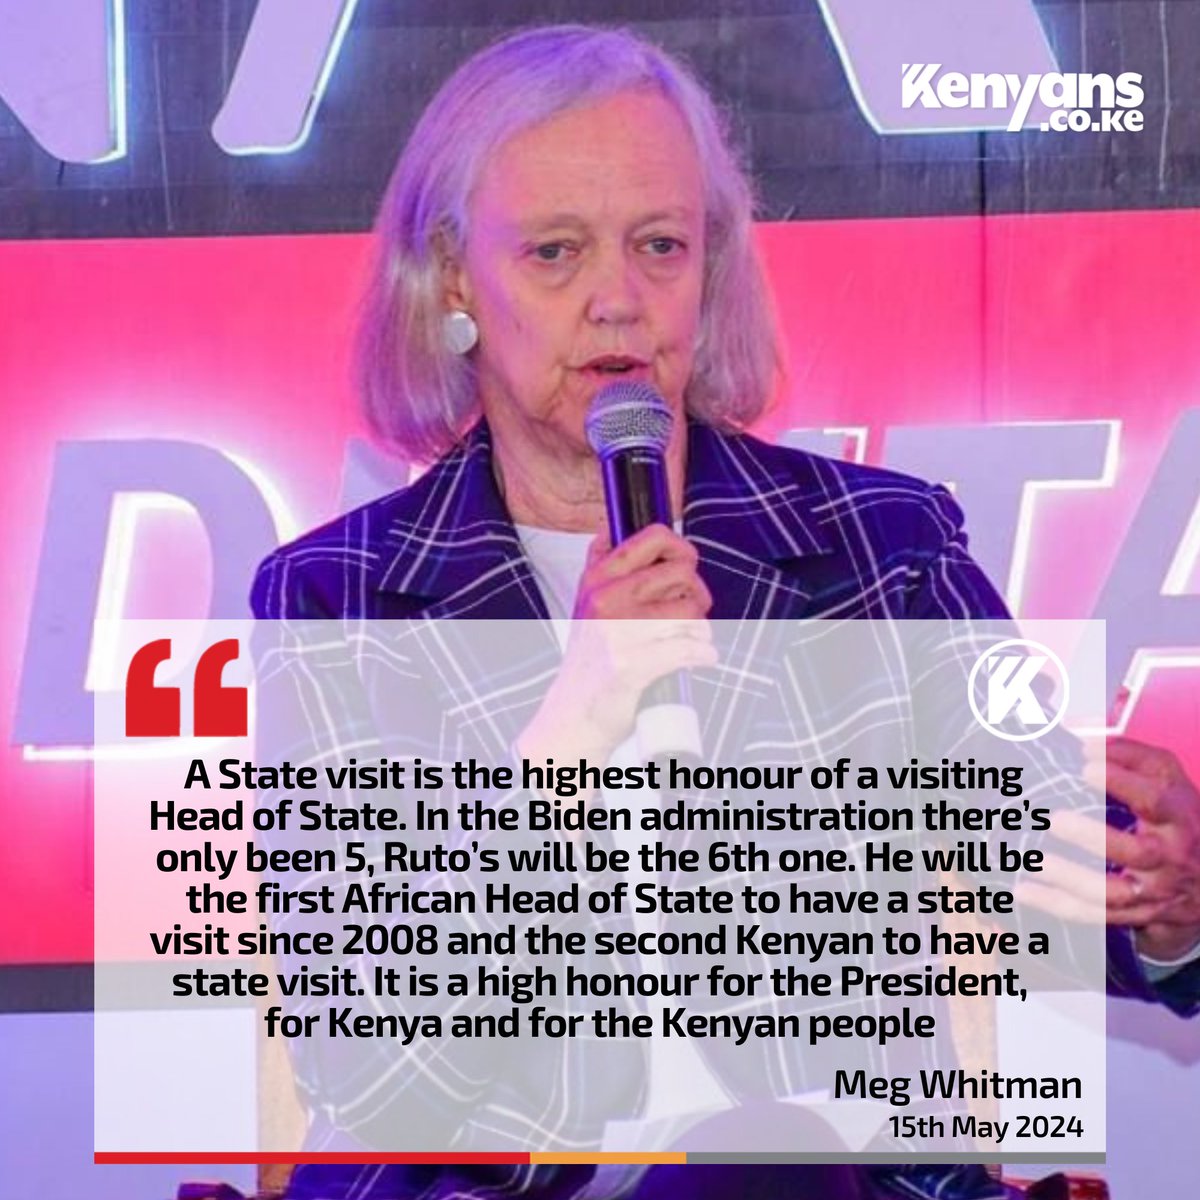 Ruto will be the first African Head of State to have a state visit since 2008. It is a high honour for Kenyans - US Ambassador to Kenya Meg Whitman